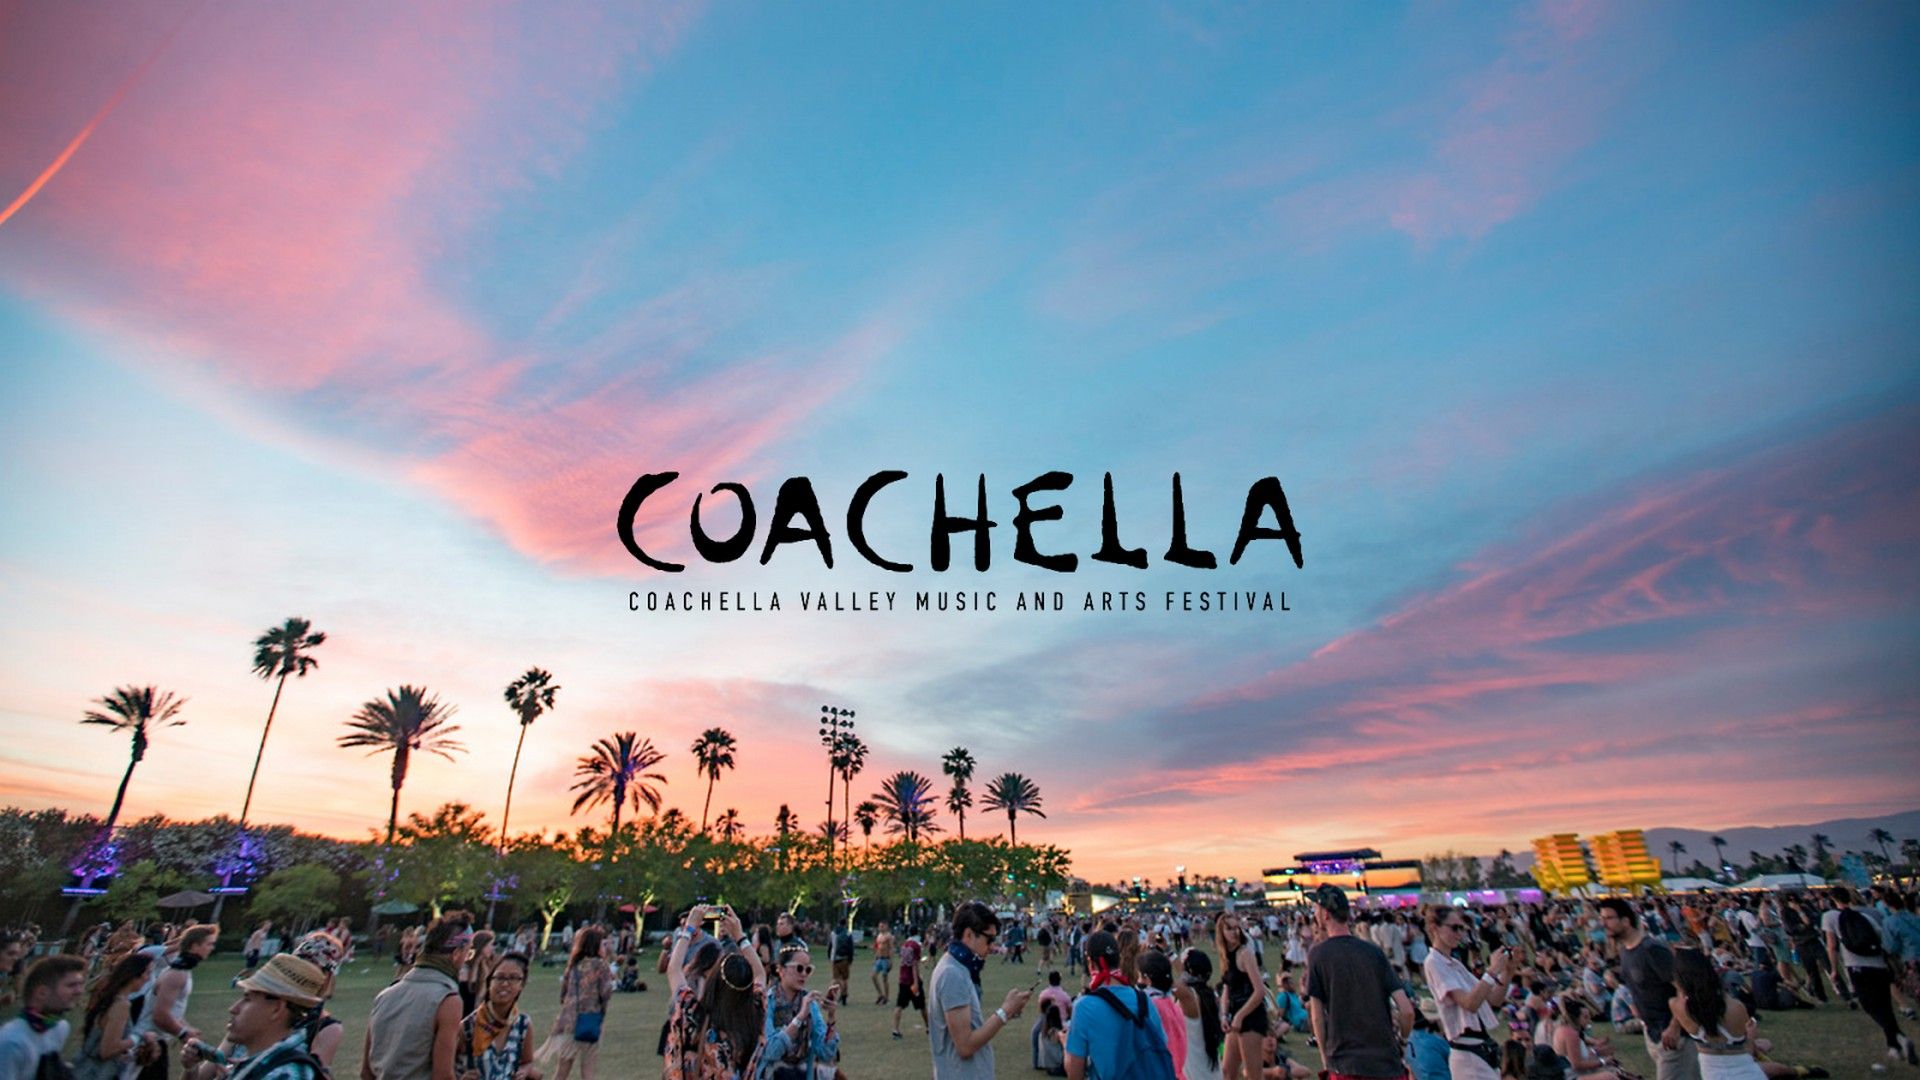 Download The scenic grounds of the Coachella Valley Music and Arts Festival   Wallpaperscom